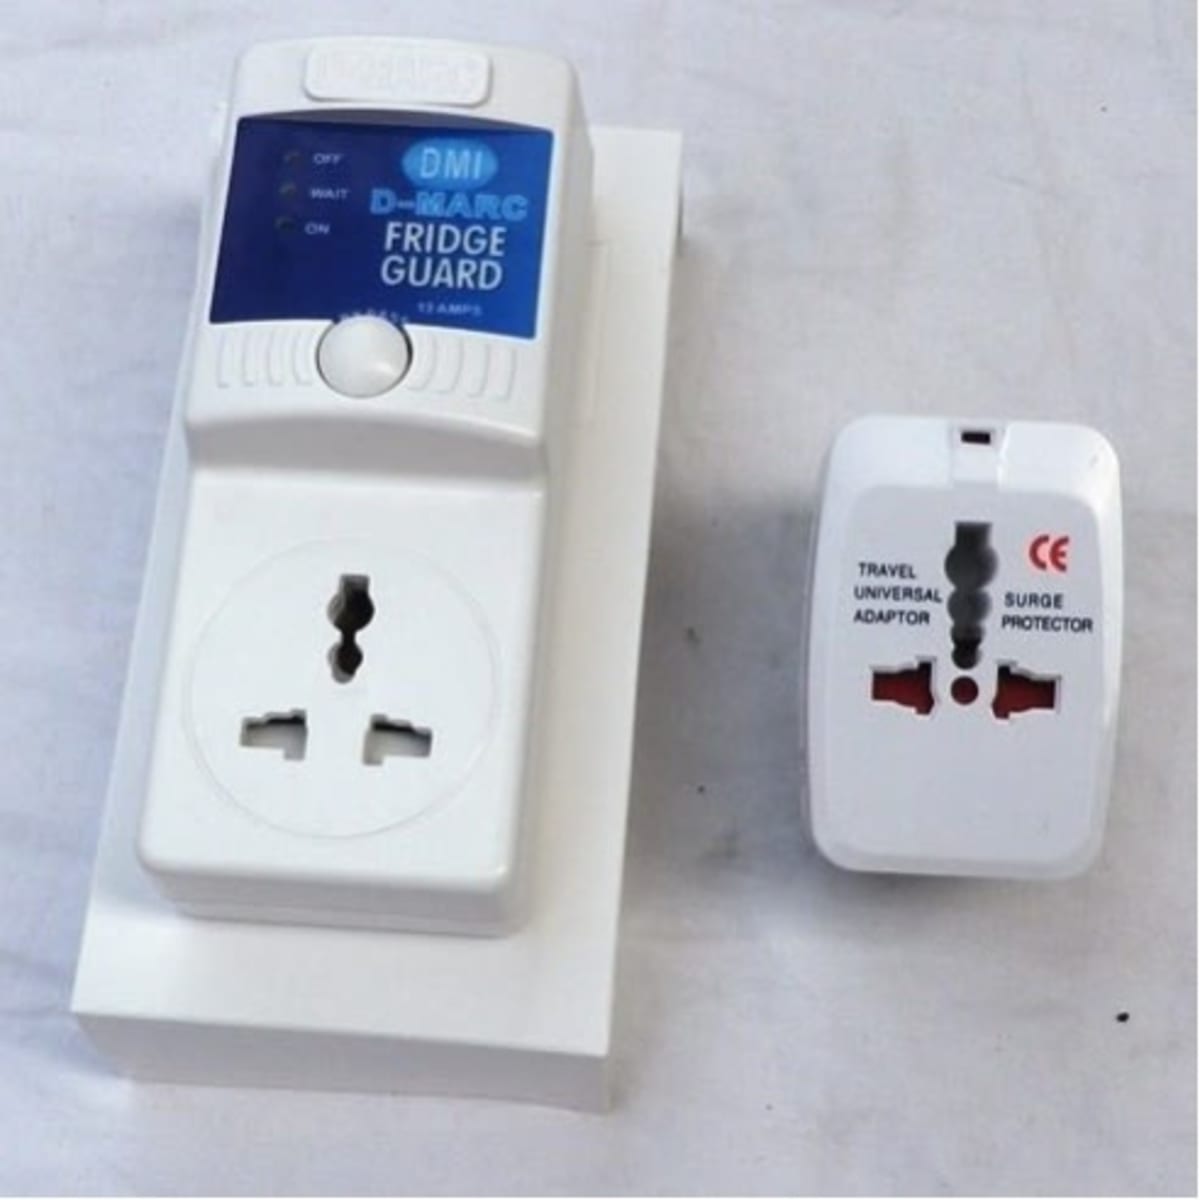 Fridge Guard 5 Amps Surge Protector + Universal Travel Wall Charger With  Surge Protector